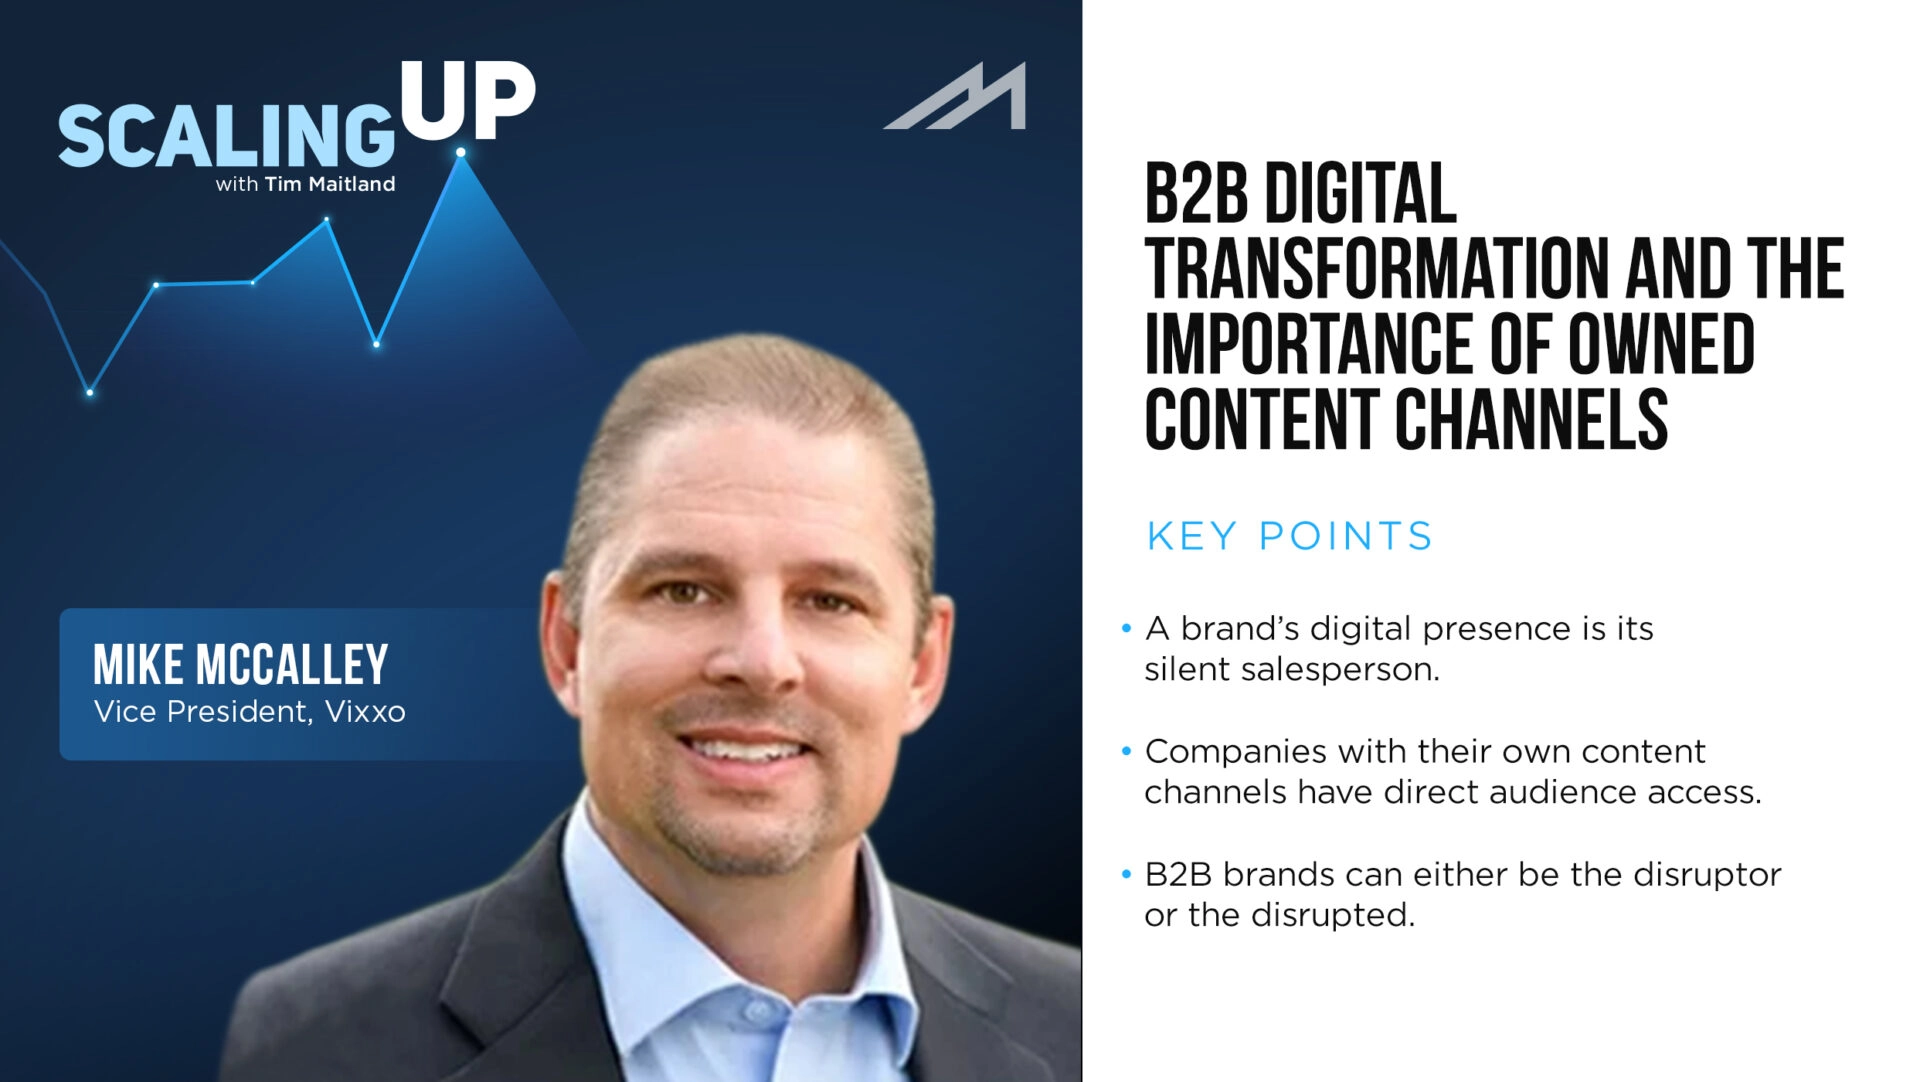 B2B Digital Transformation and the Importance of Owned Content Channels ...